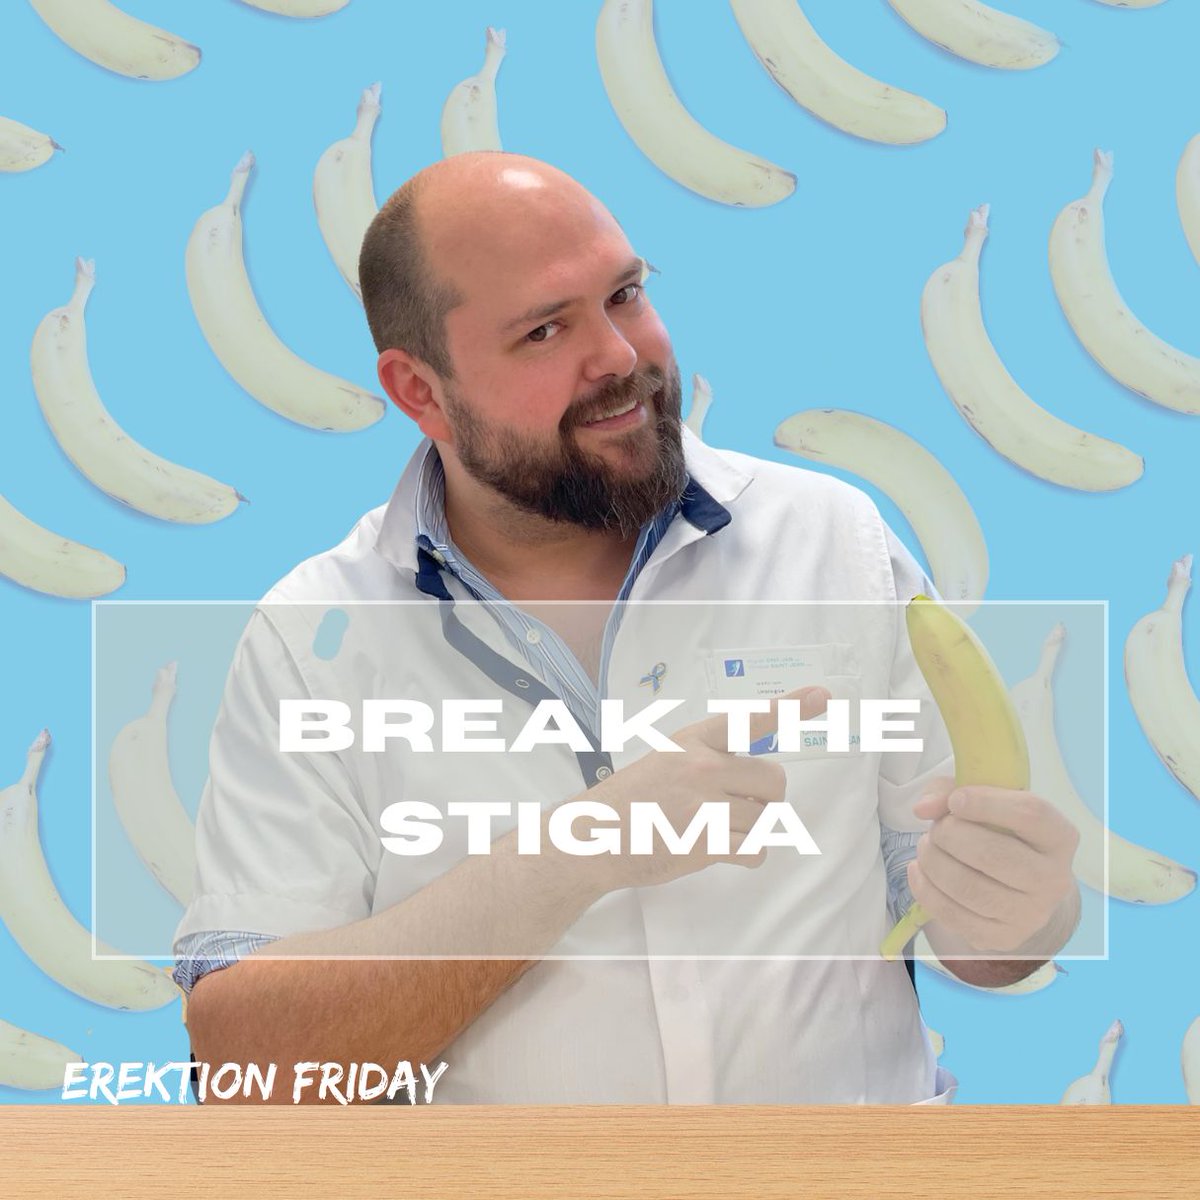 Let's break the stigma around sexual health. Er*ctions can vary in frequency and intensity, but it's essential to address any concerns. Talk to your GP or dedicated sexual health expert if you’re experiencing problems. buff.ly/3SUaRgG #erektionfriday #WardOfYourHealth